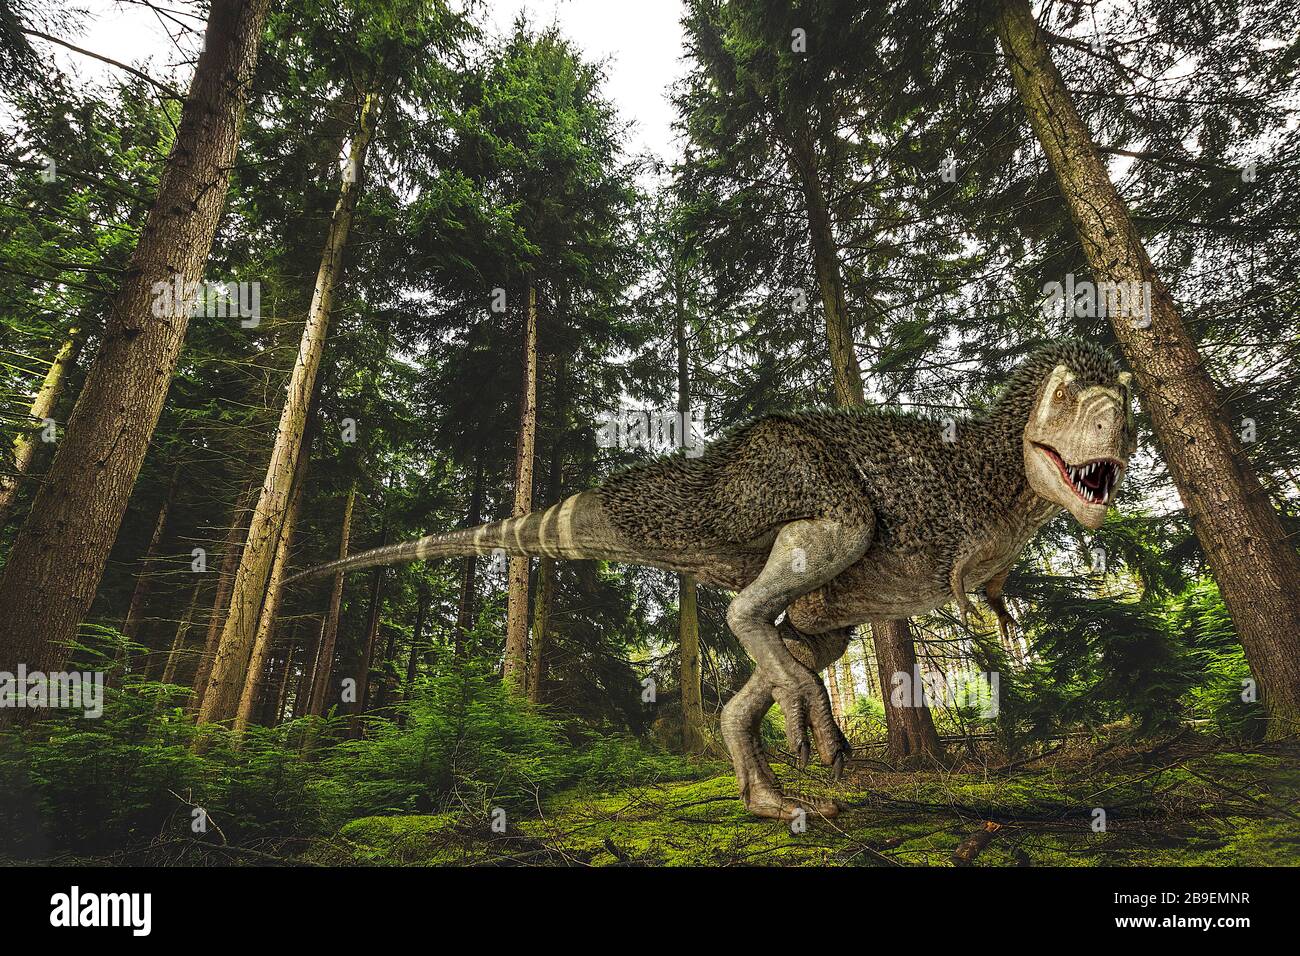 3D illustration of a T-Rex with feathers hunting in the forest. Stock Photo